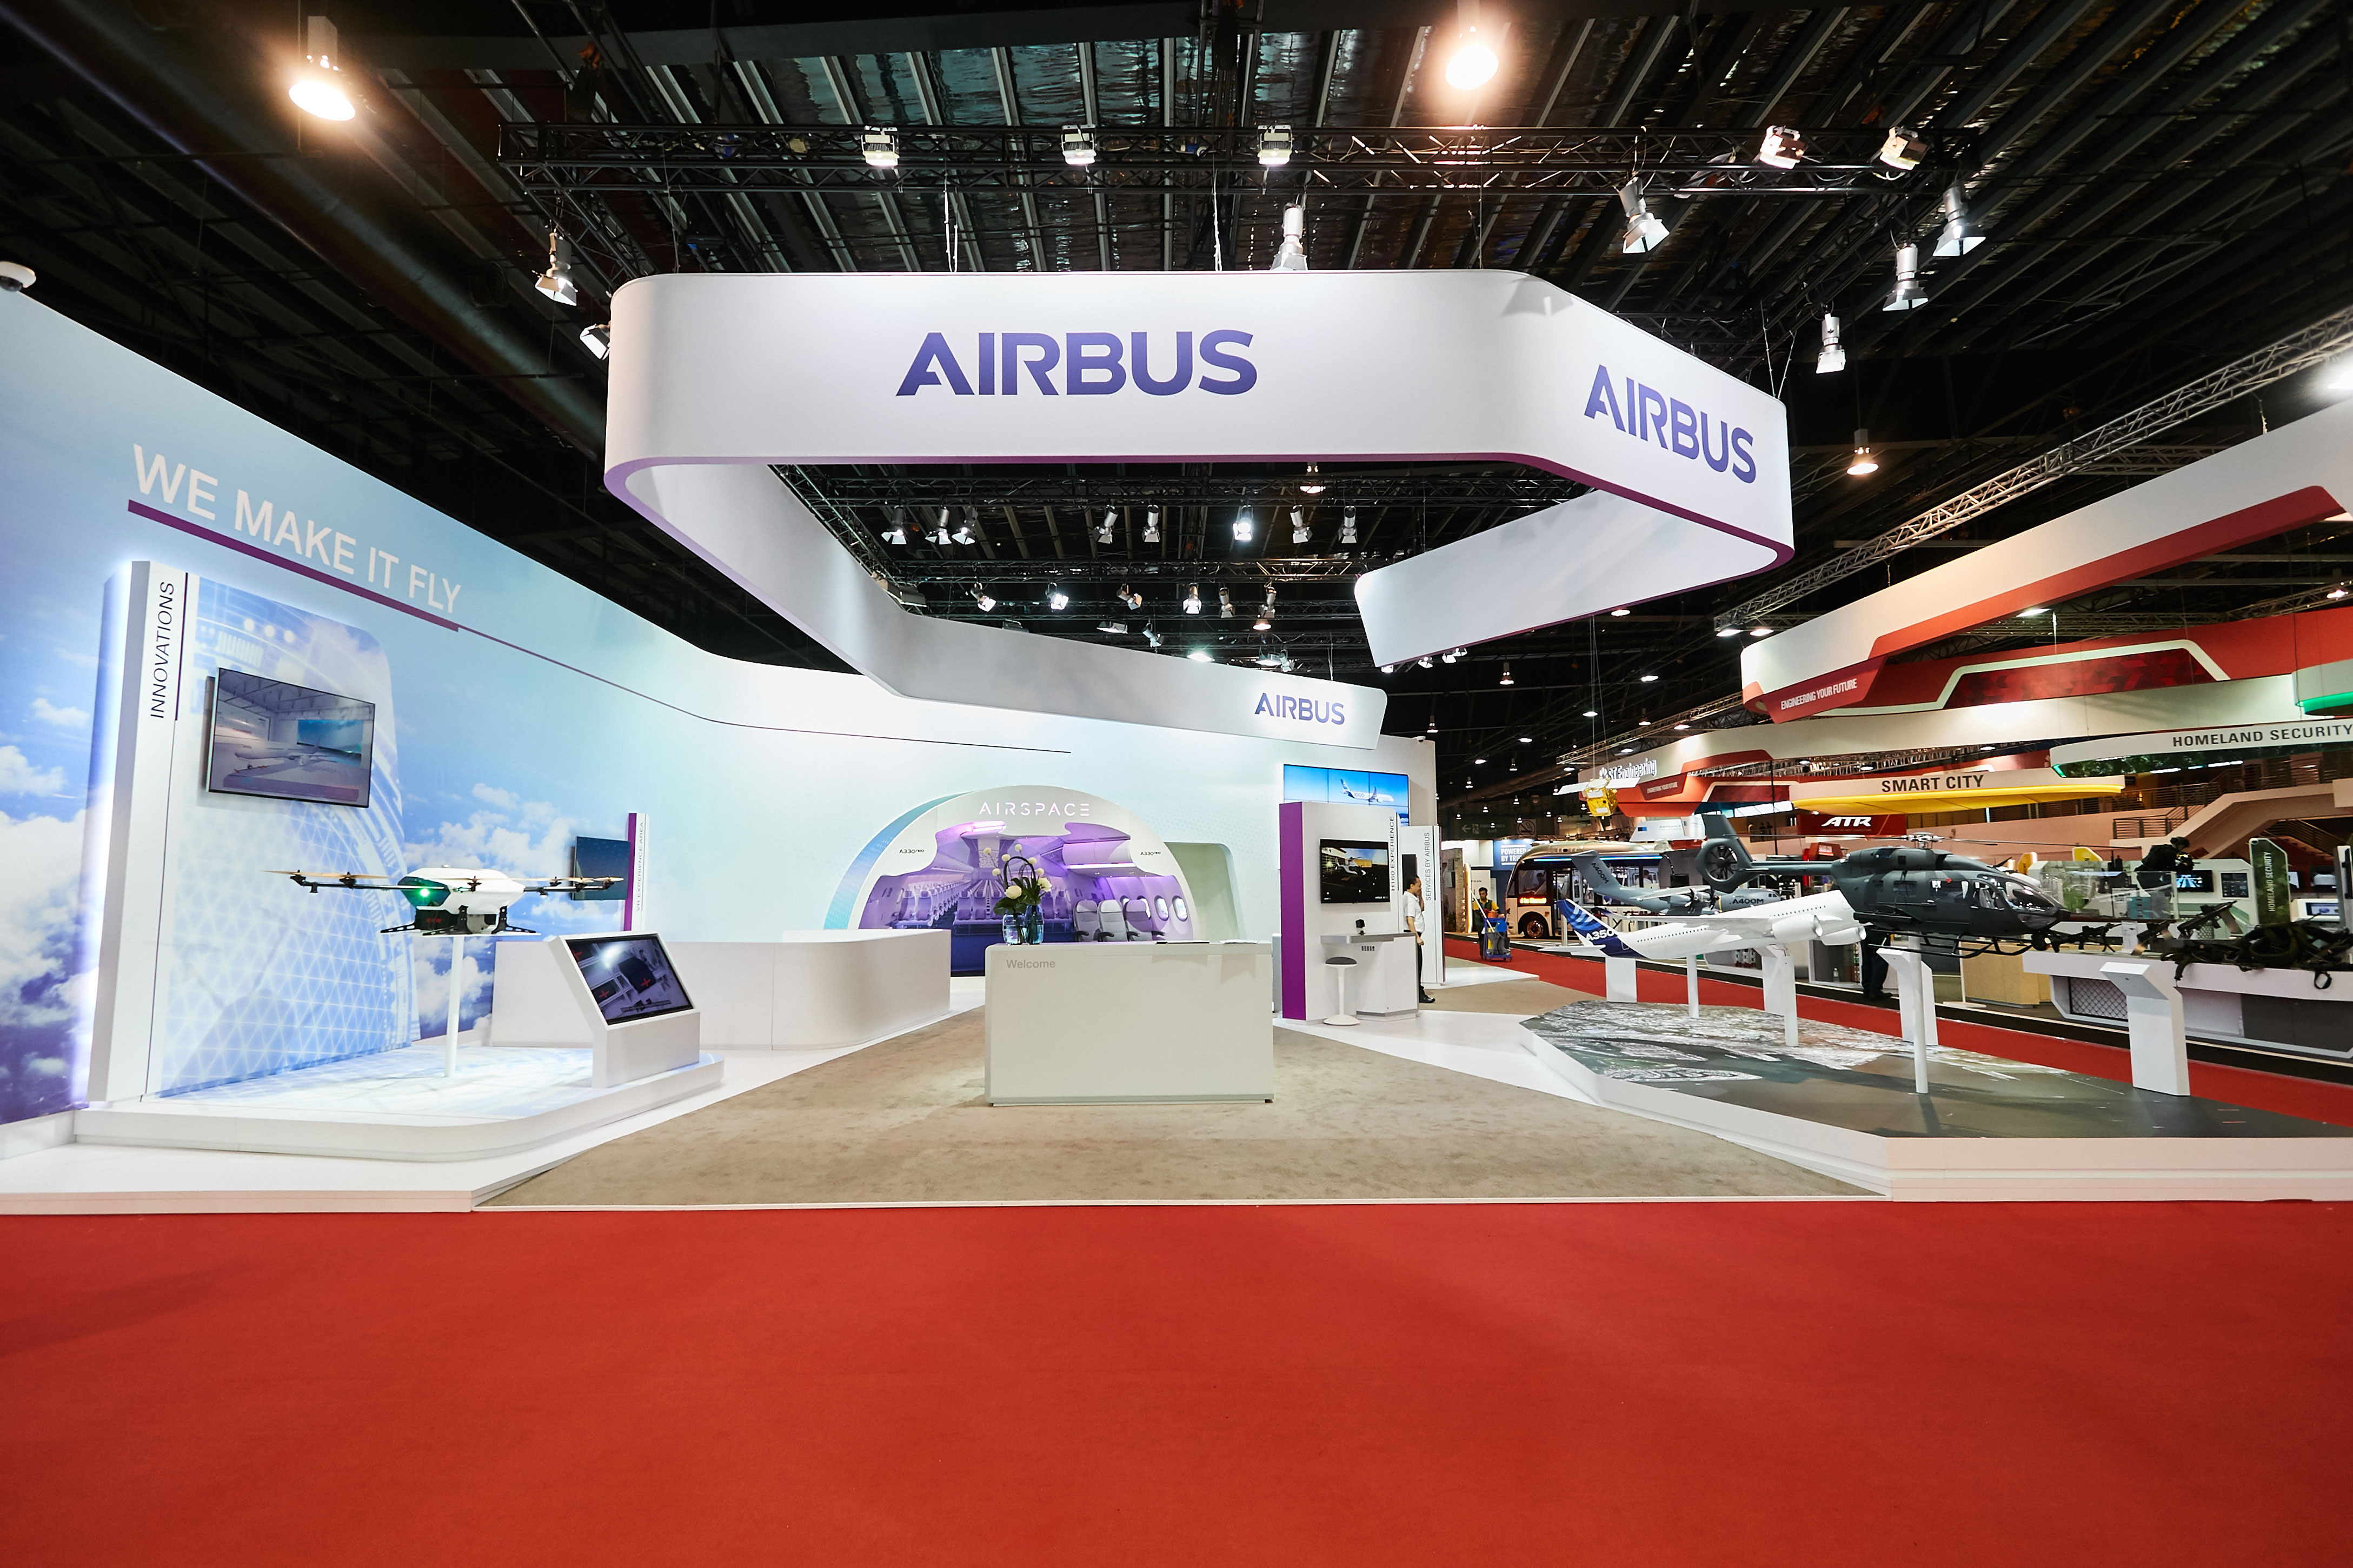 http://www.nestsolutionsgroup.com/wp-content/uploads/2019/02/AIRBUS_006.jpg